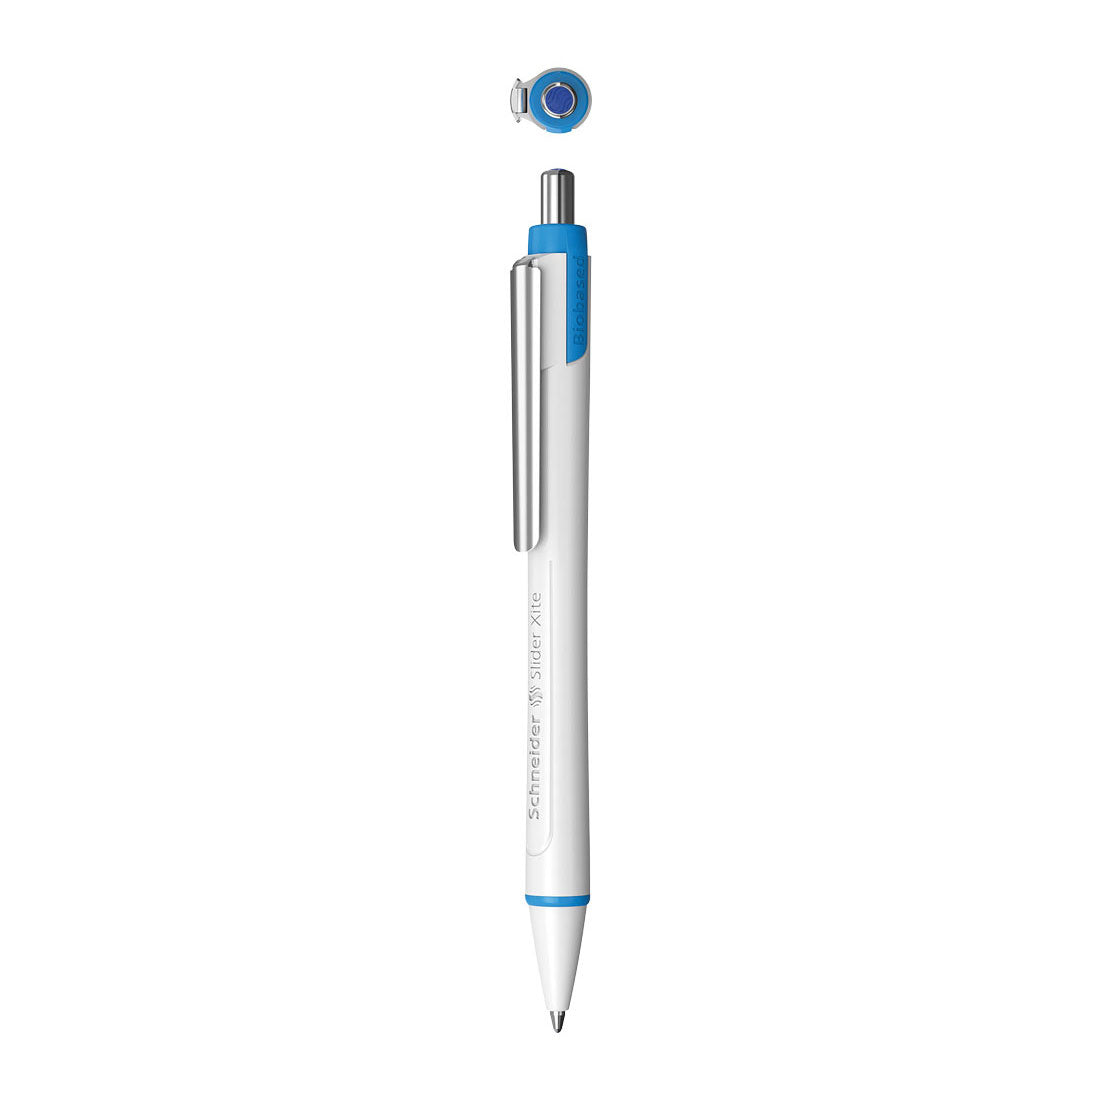 Xite Ballpoint Pen XB, Box of 10#ink-color_blue